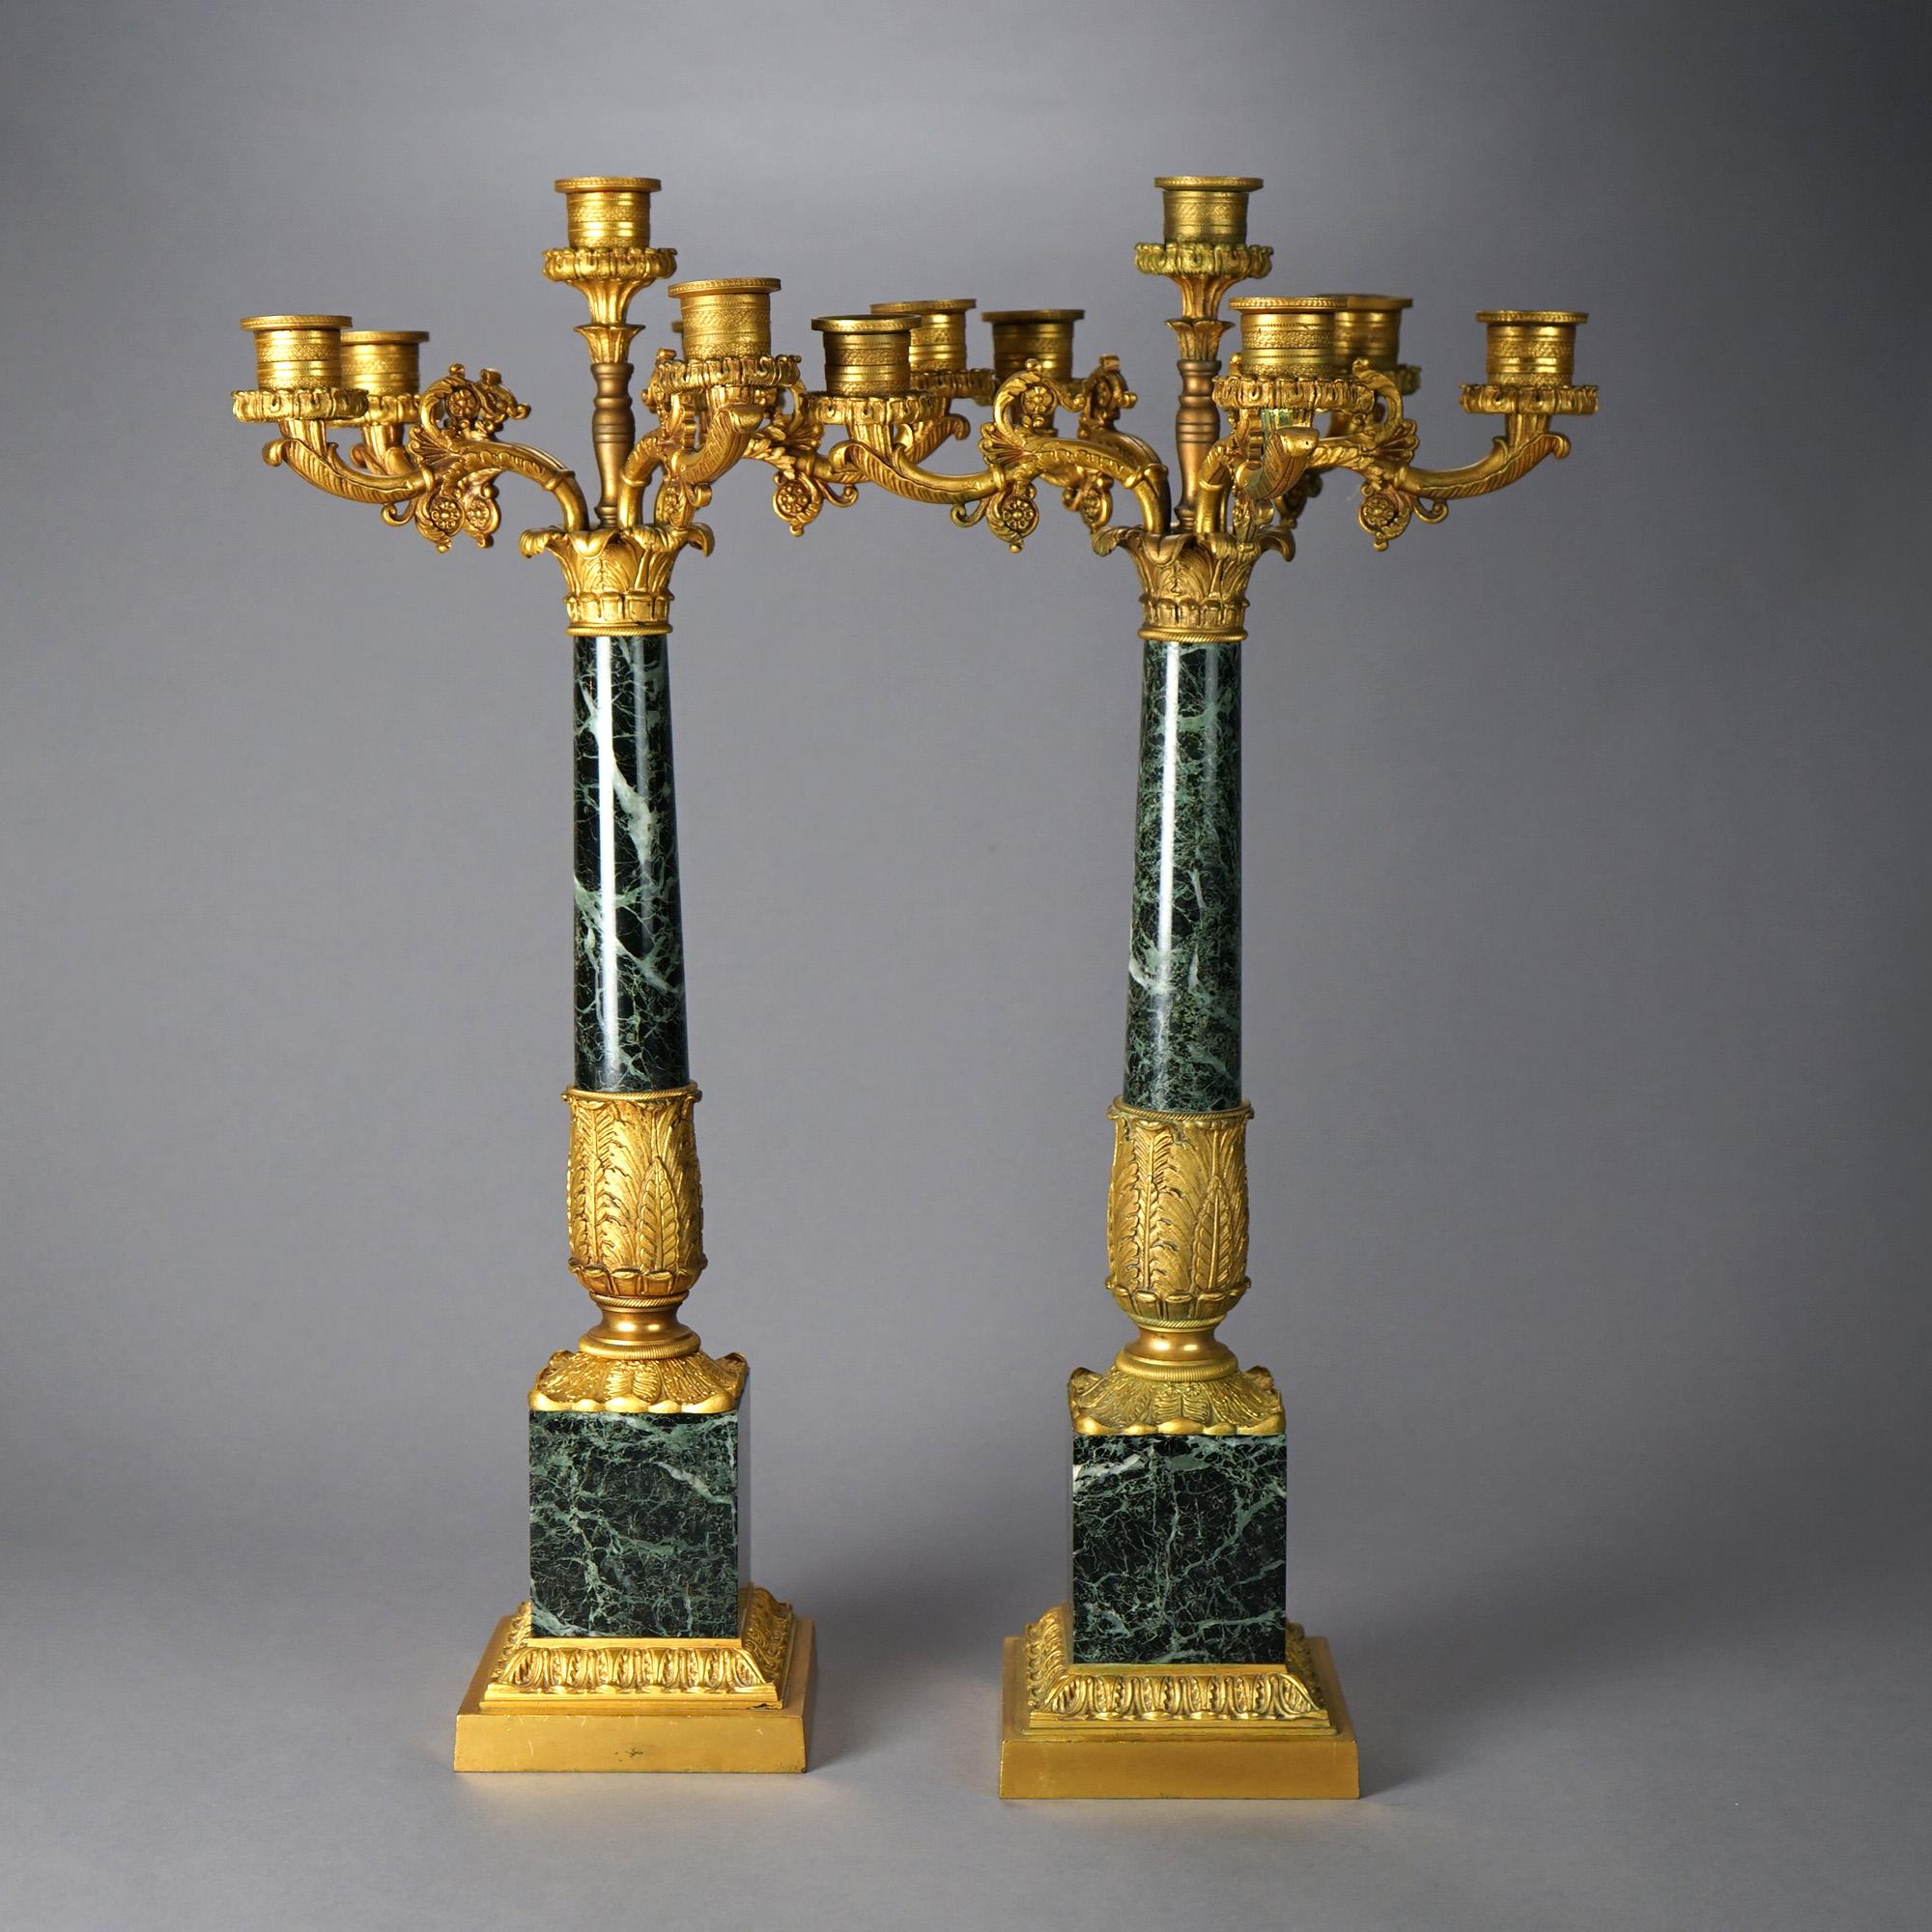 Cast Antique Pair of French Empire Gilt Bronze & Marble Candelabra19th C For Sale